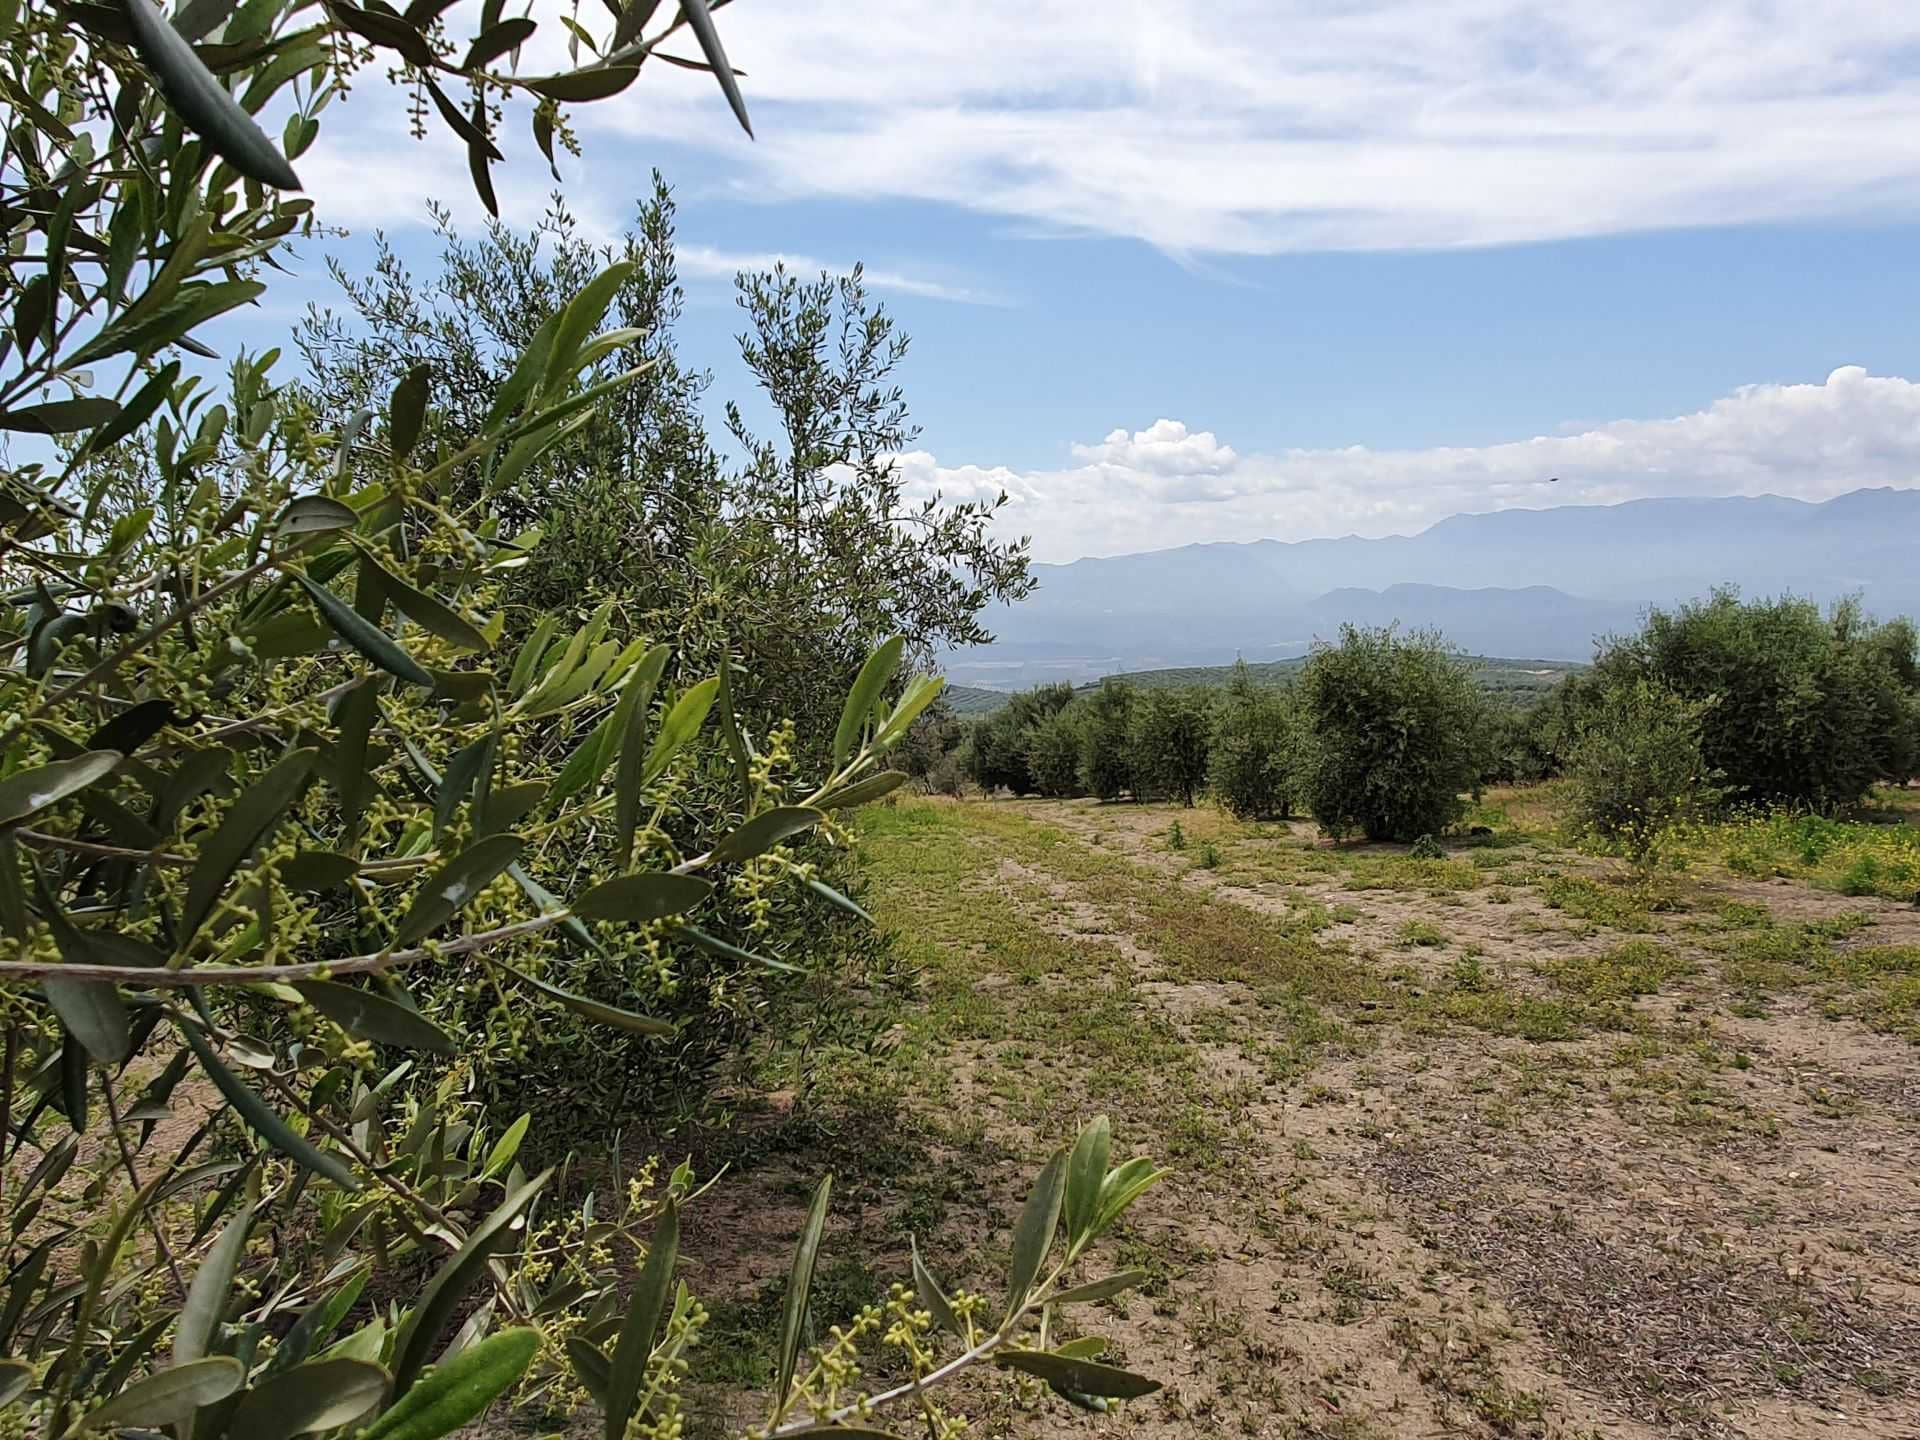 europe-the-best-olive-oils-competitions-andalusian-producers-overcome-obstacles-to-triumph-at-2021-nyiooc-olive-oil-times